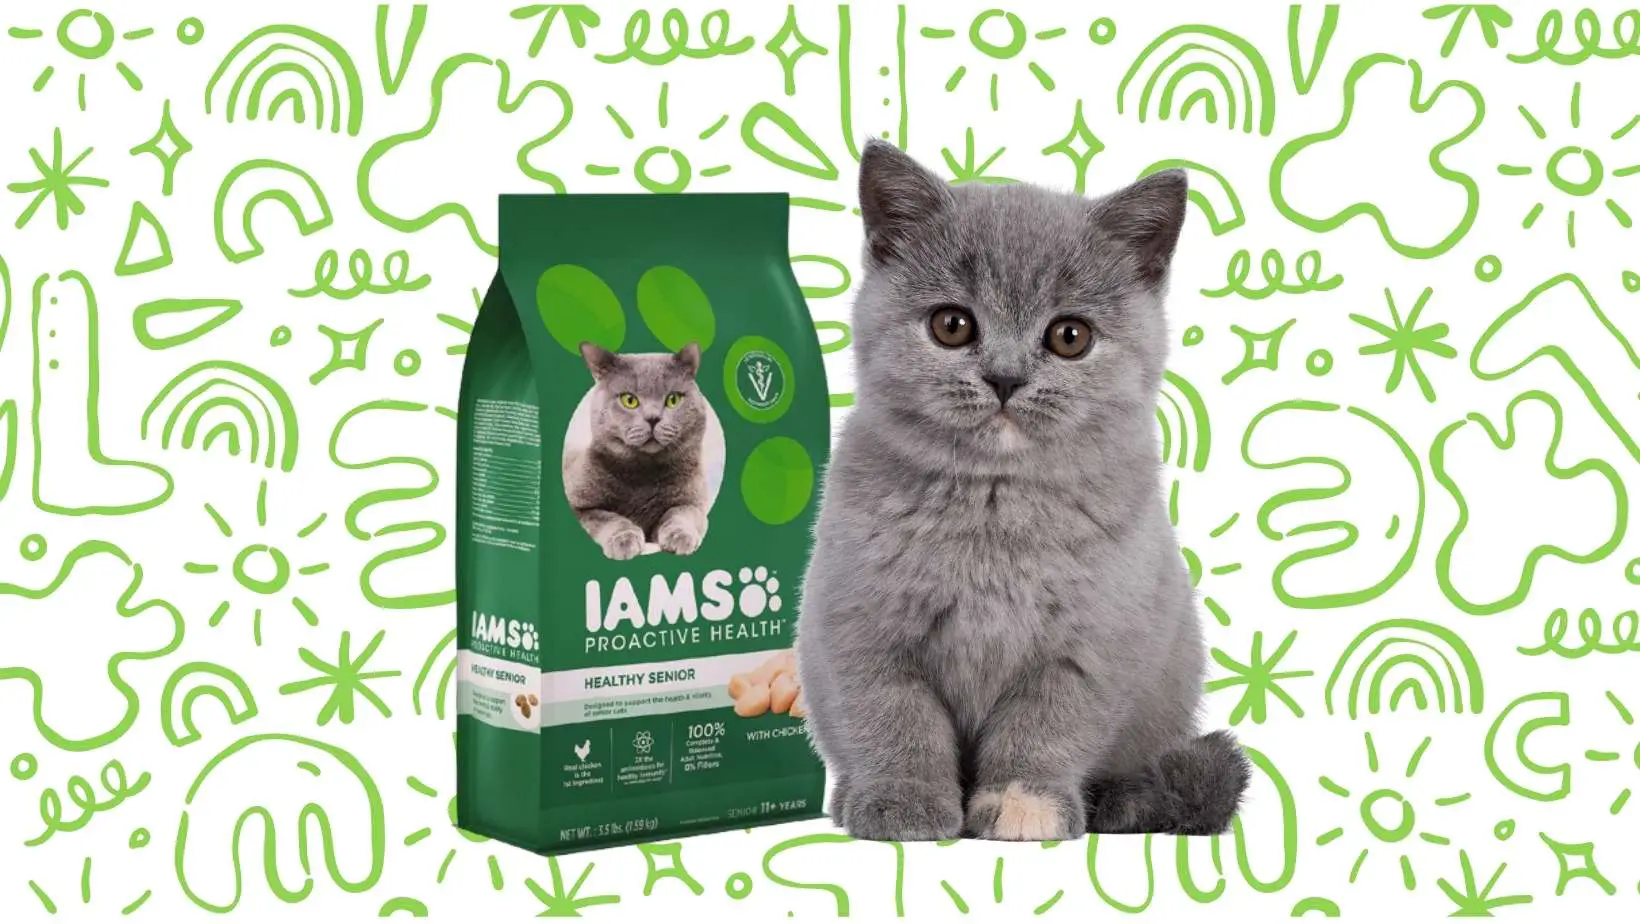 Is Iams Good for Cats?